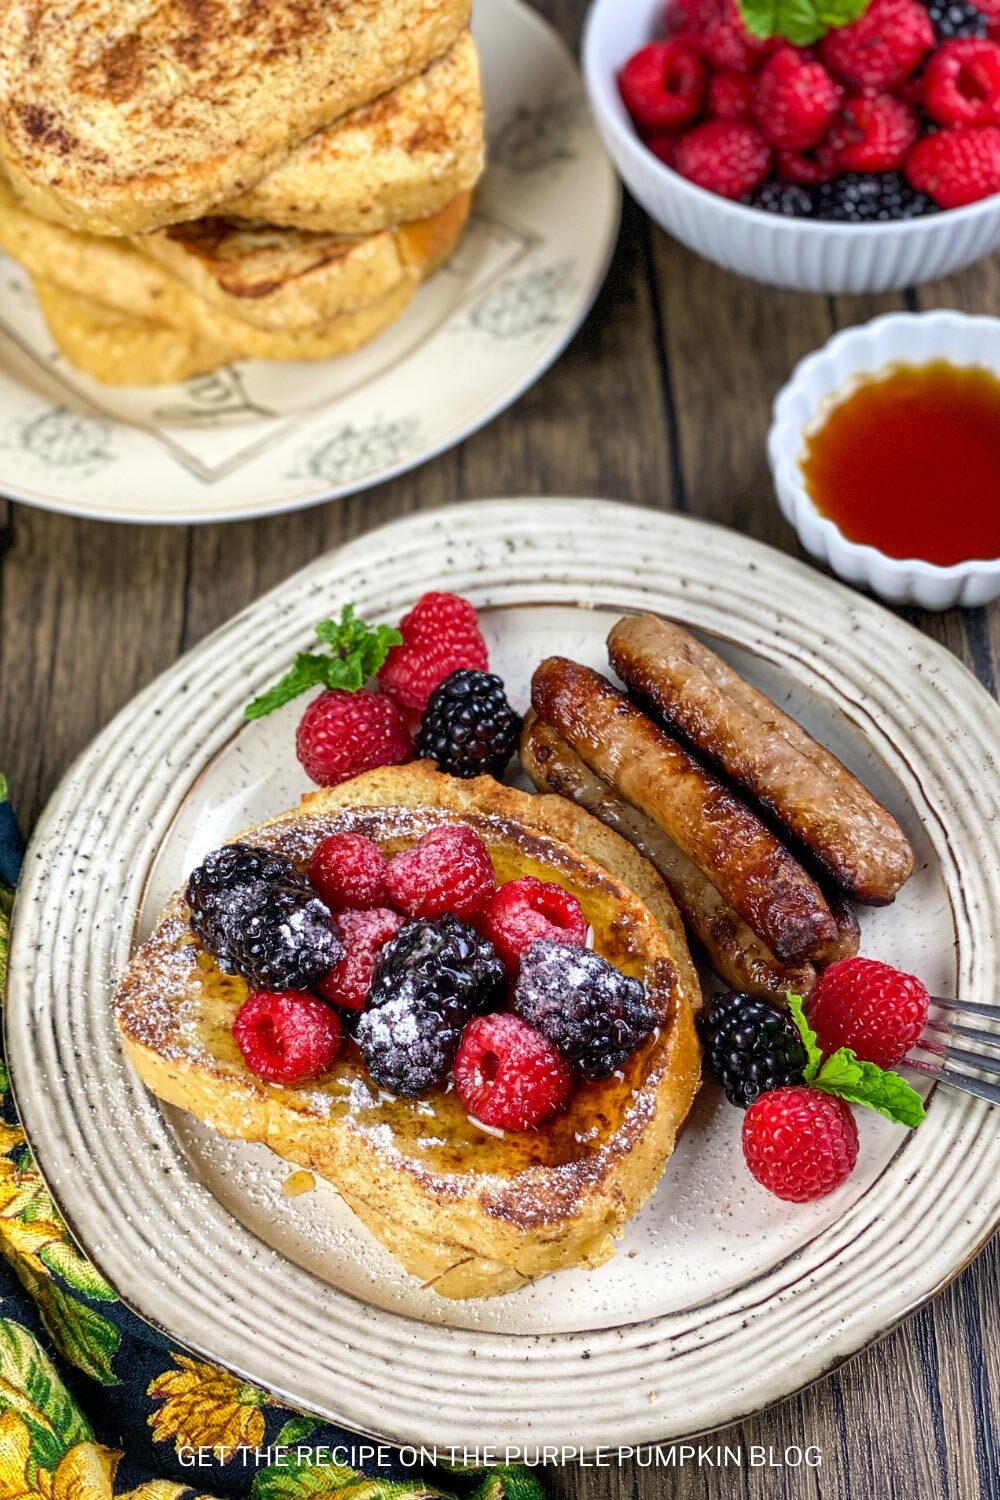 Sourdough French Toast Recipe for Breakfast